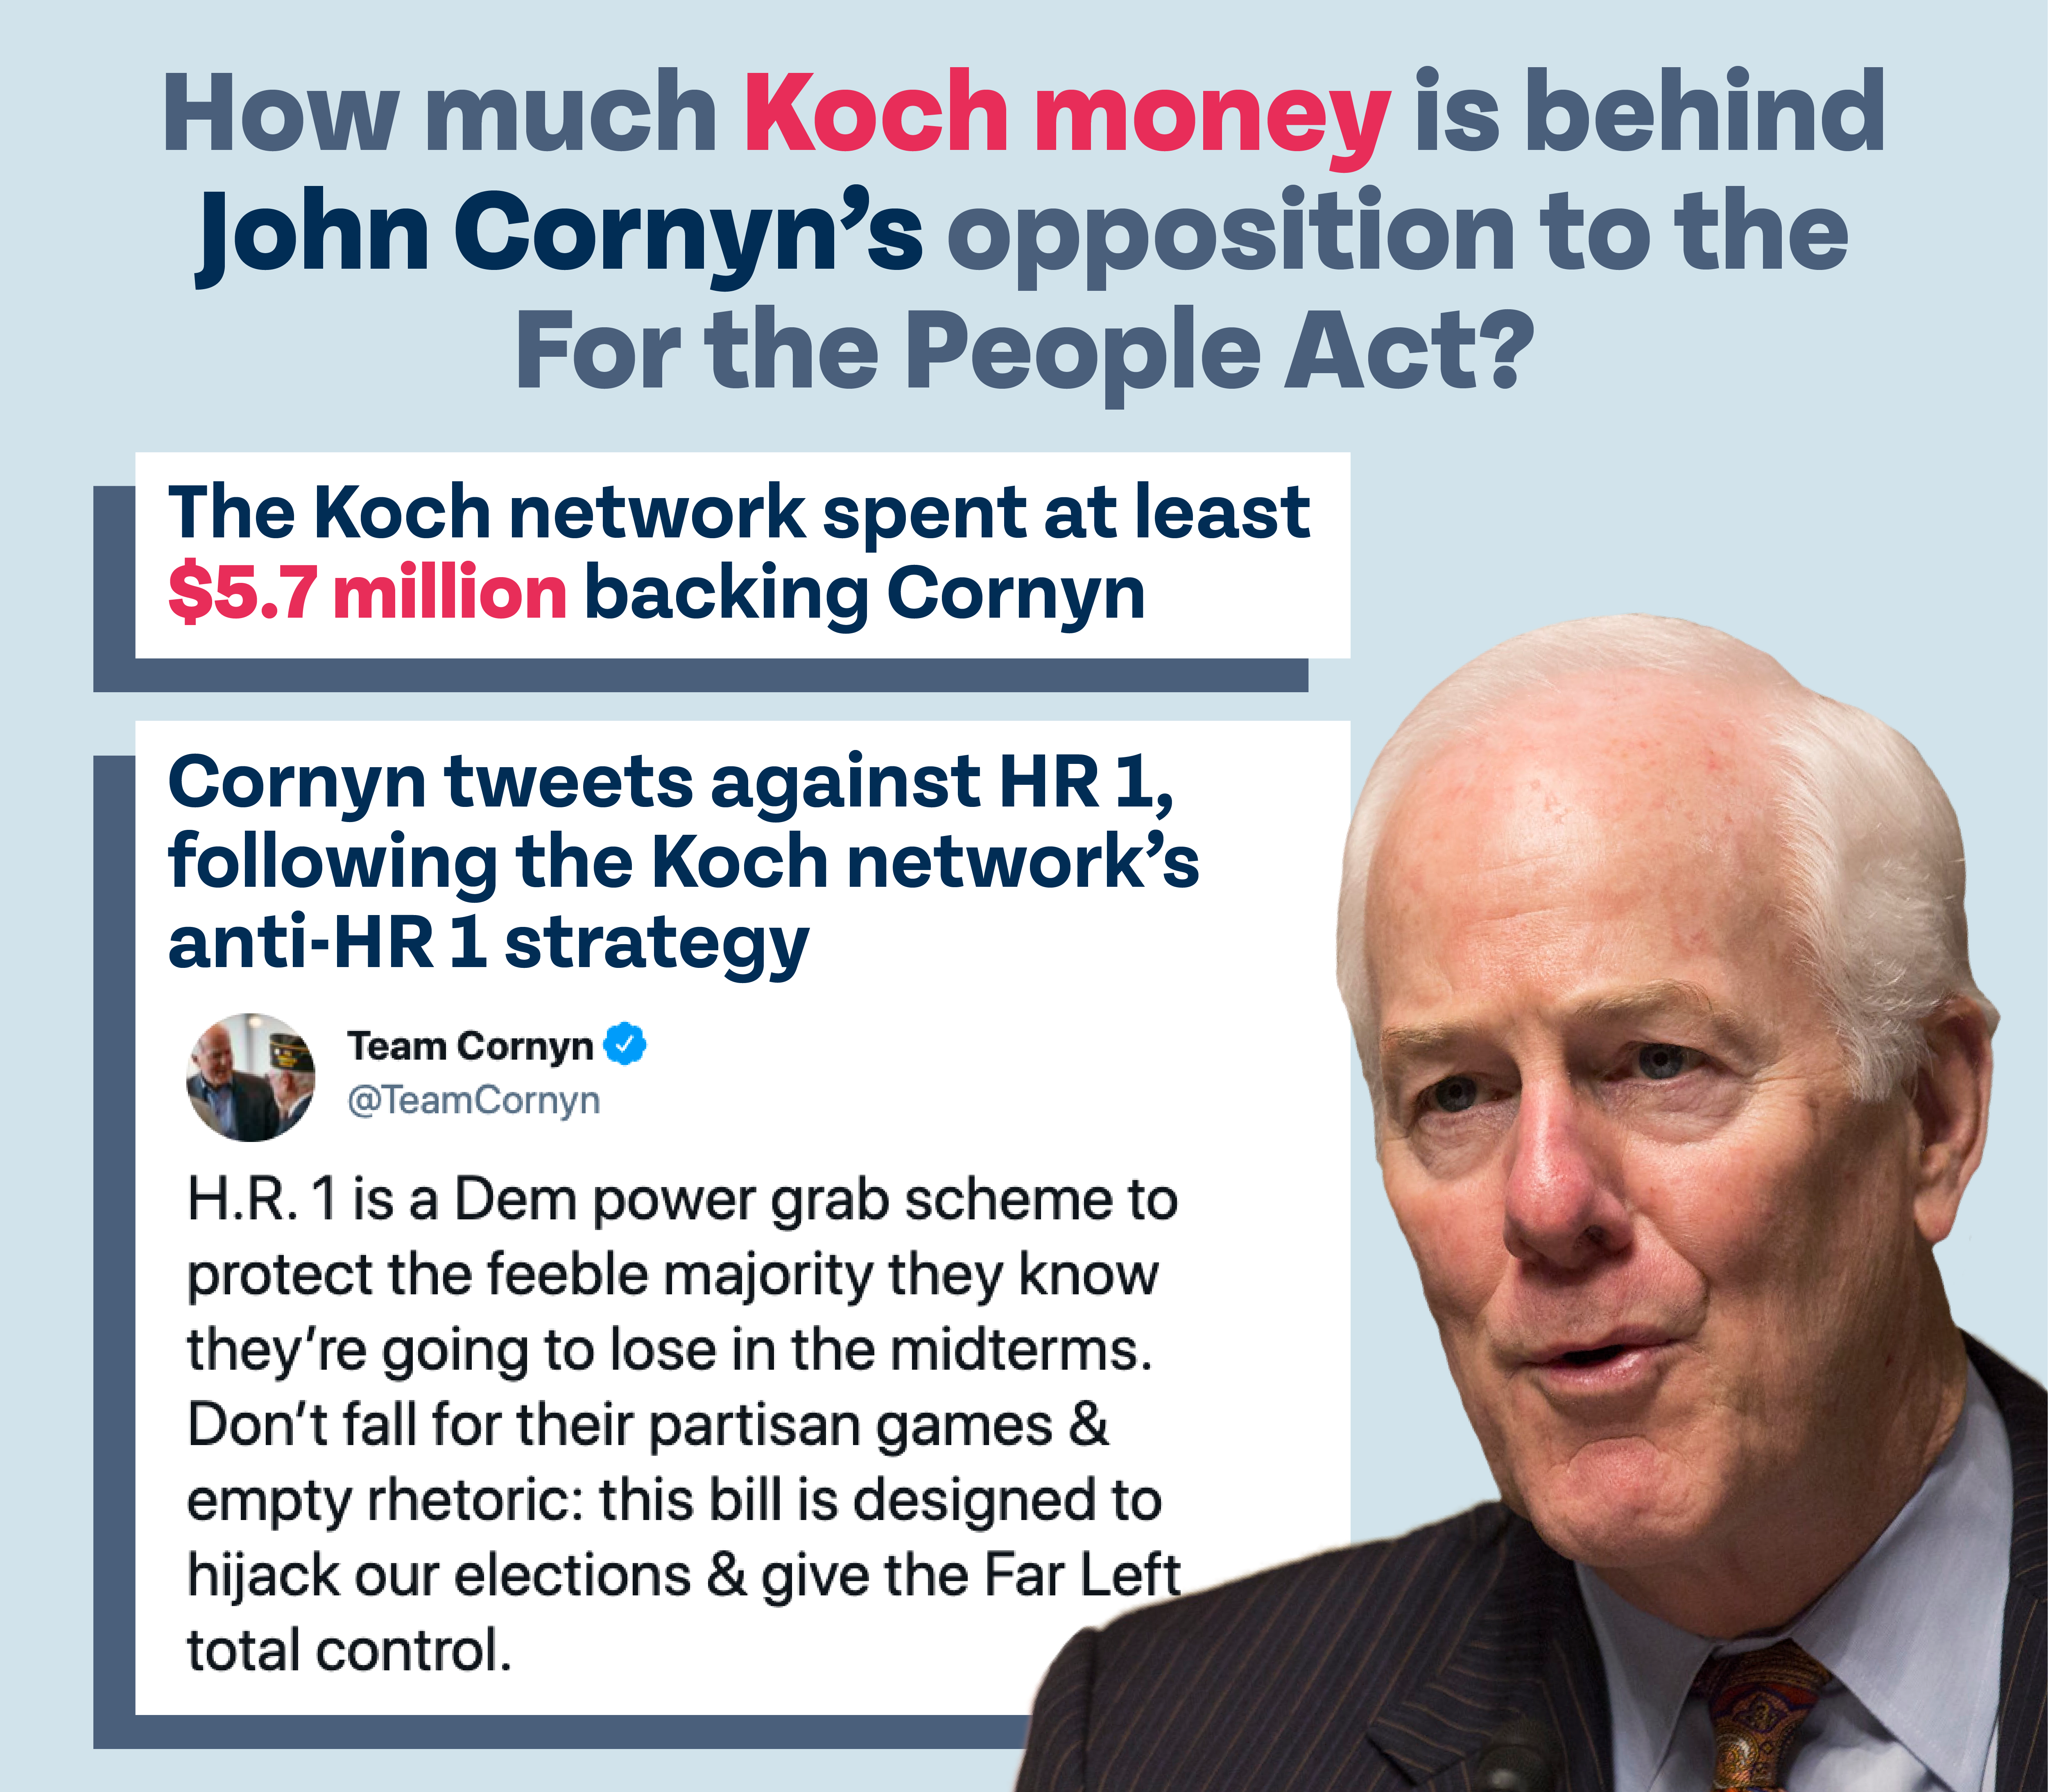 How much Koch money is behind John Cornyn’s opposition to the For the People Act? The Koch network spent at least $5.7 million backing Cornyn. Cornyn tweets against HR 1, following the Koch network’s anti-HR 1 strategy: @TeamCornyn: "H.R. 1 is a Dem power grab scheme to protect the feeble majority they know they’re going to lose in the midterms. Don’t fall for their partisan games & empty rhetoric: this bill is designed to hijack our elections & give the Far Left total control."